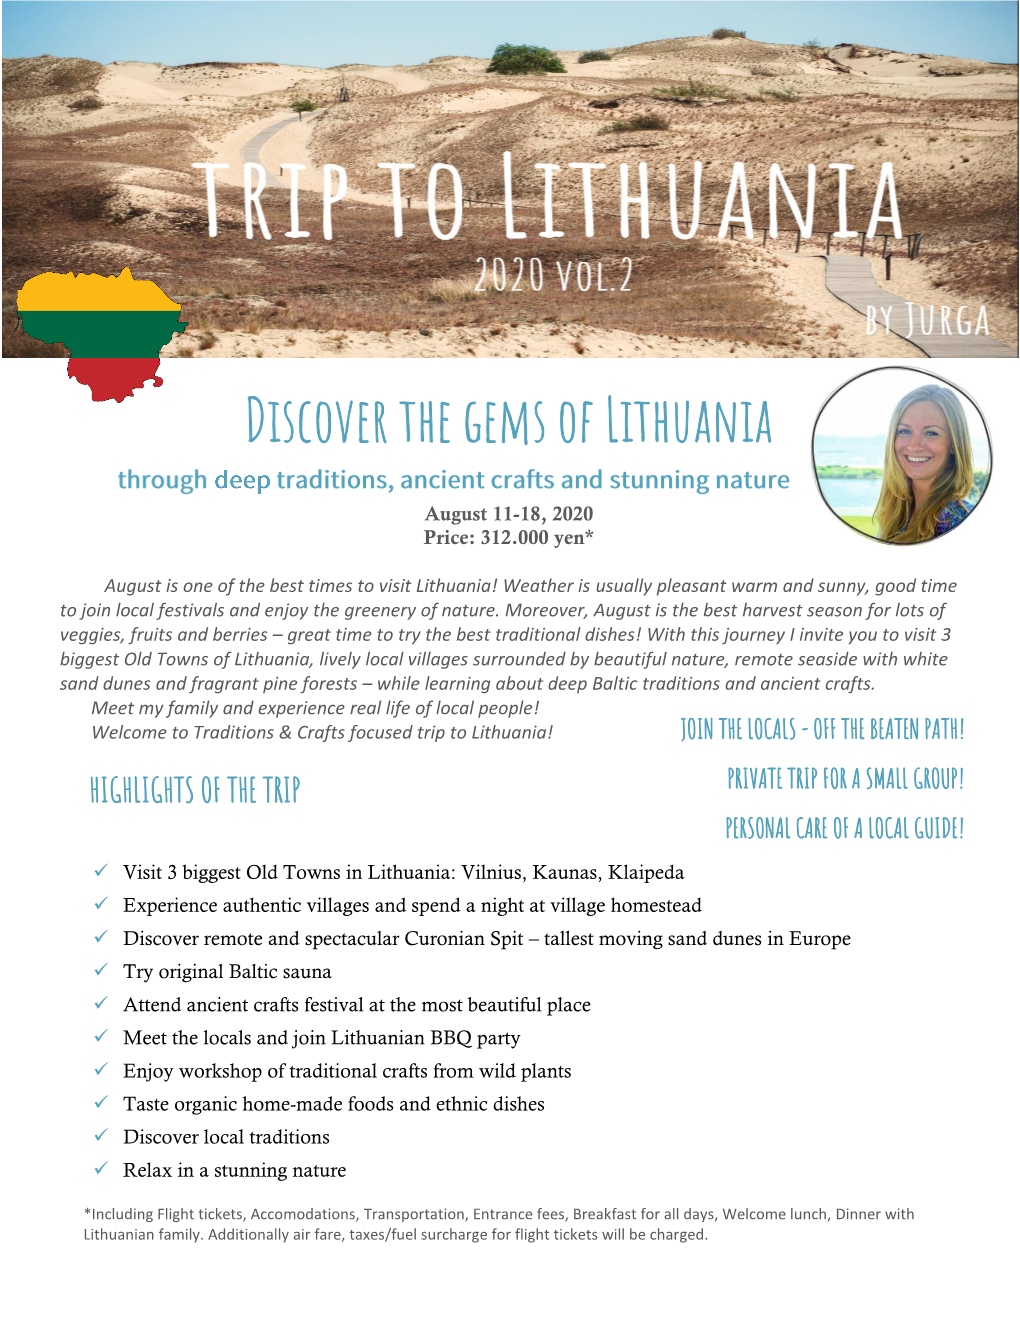 Discover the Gems of Lithuania